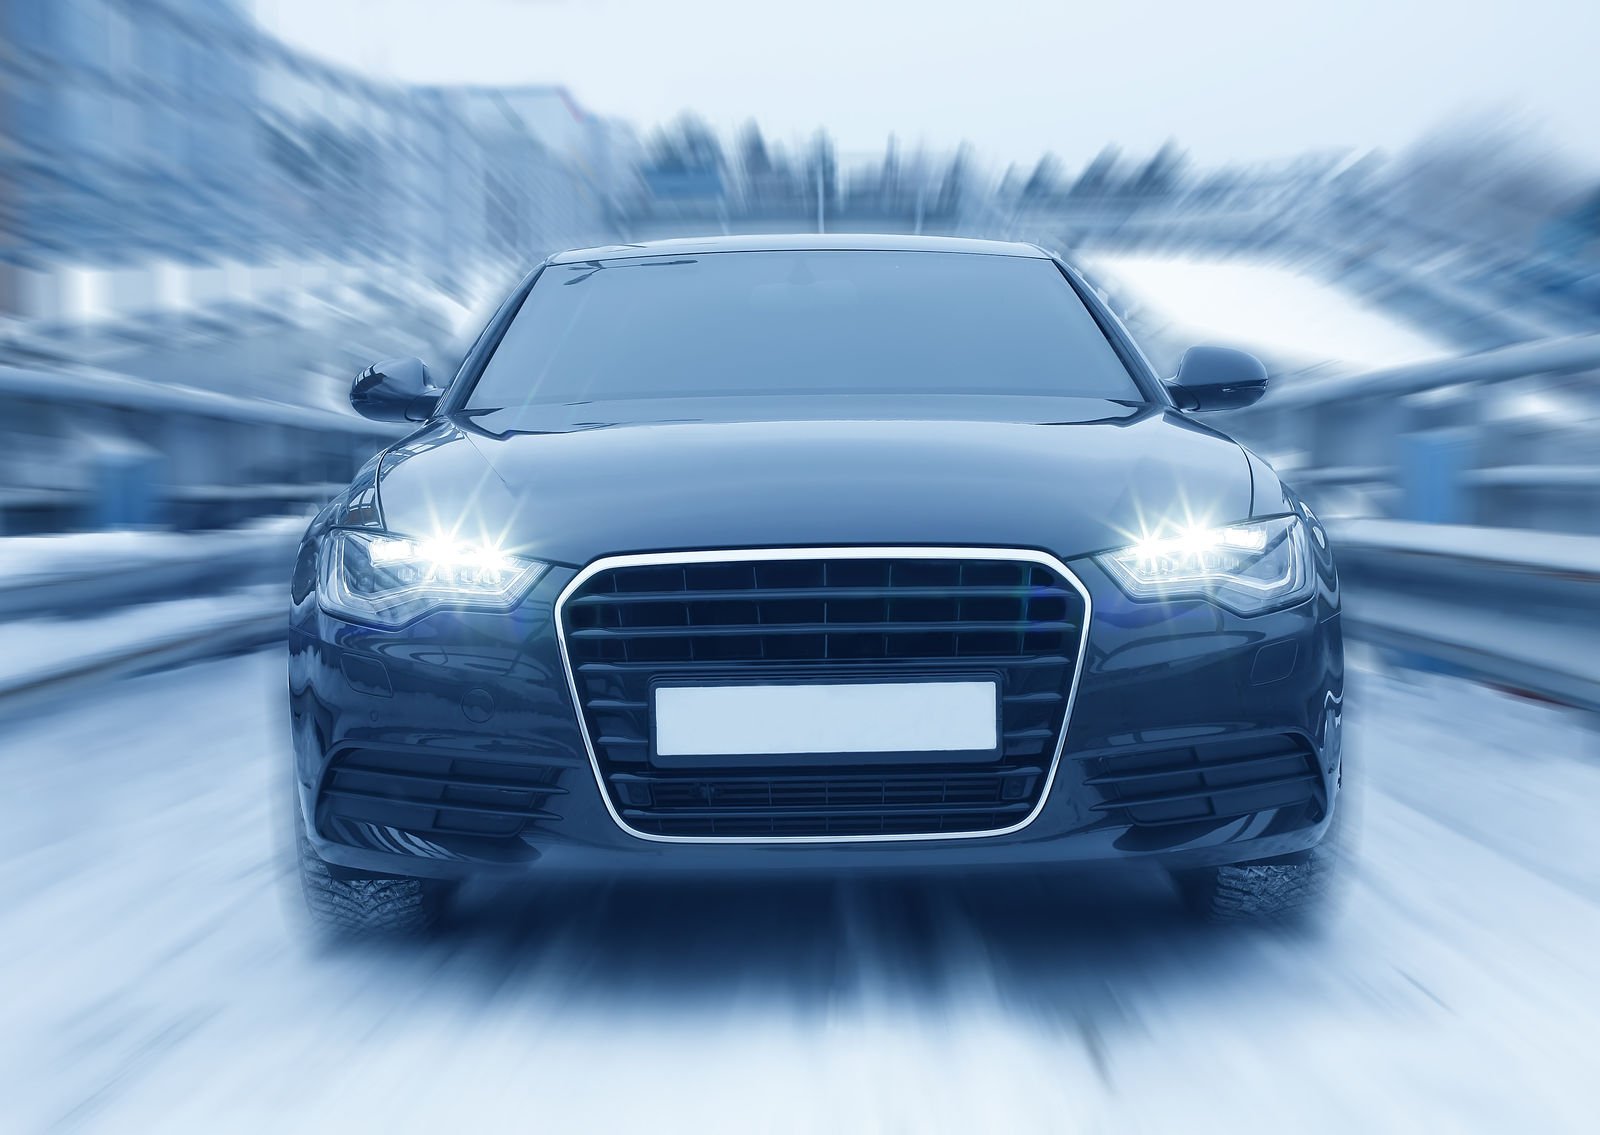 Does car insurance cover black ice?